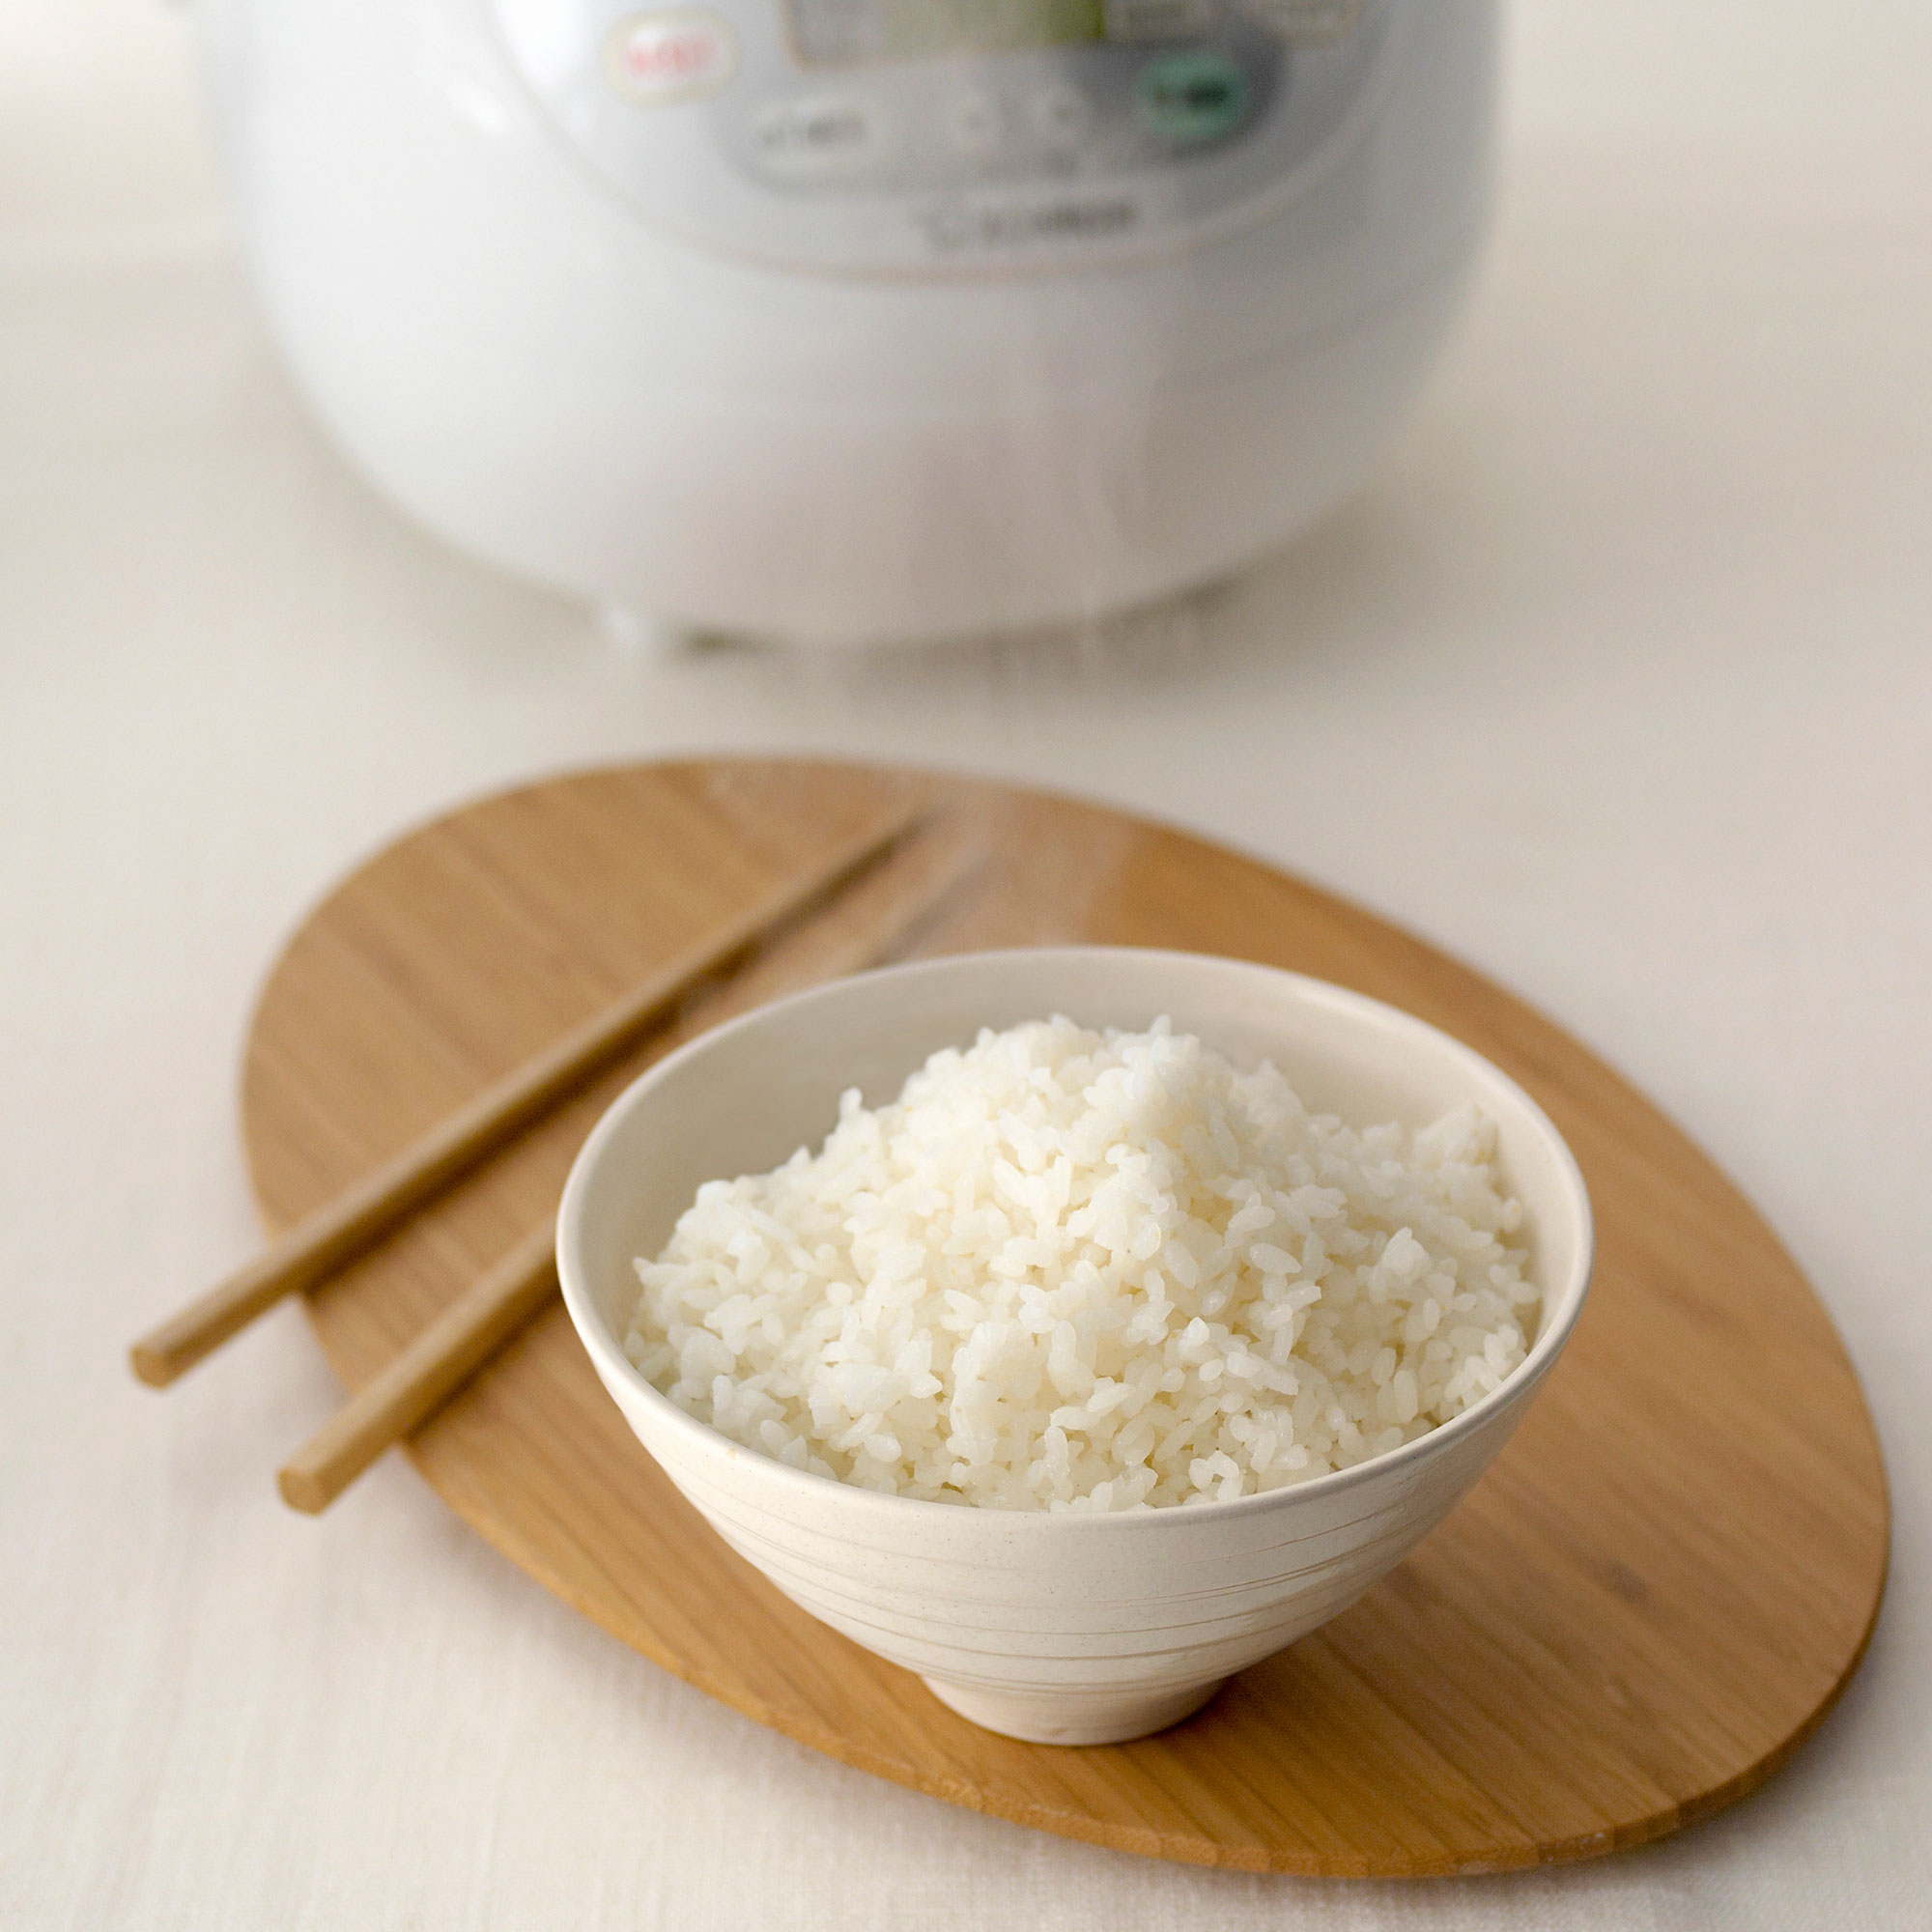 Rice Cooker Canada: Here's What You Can Make With It